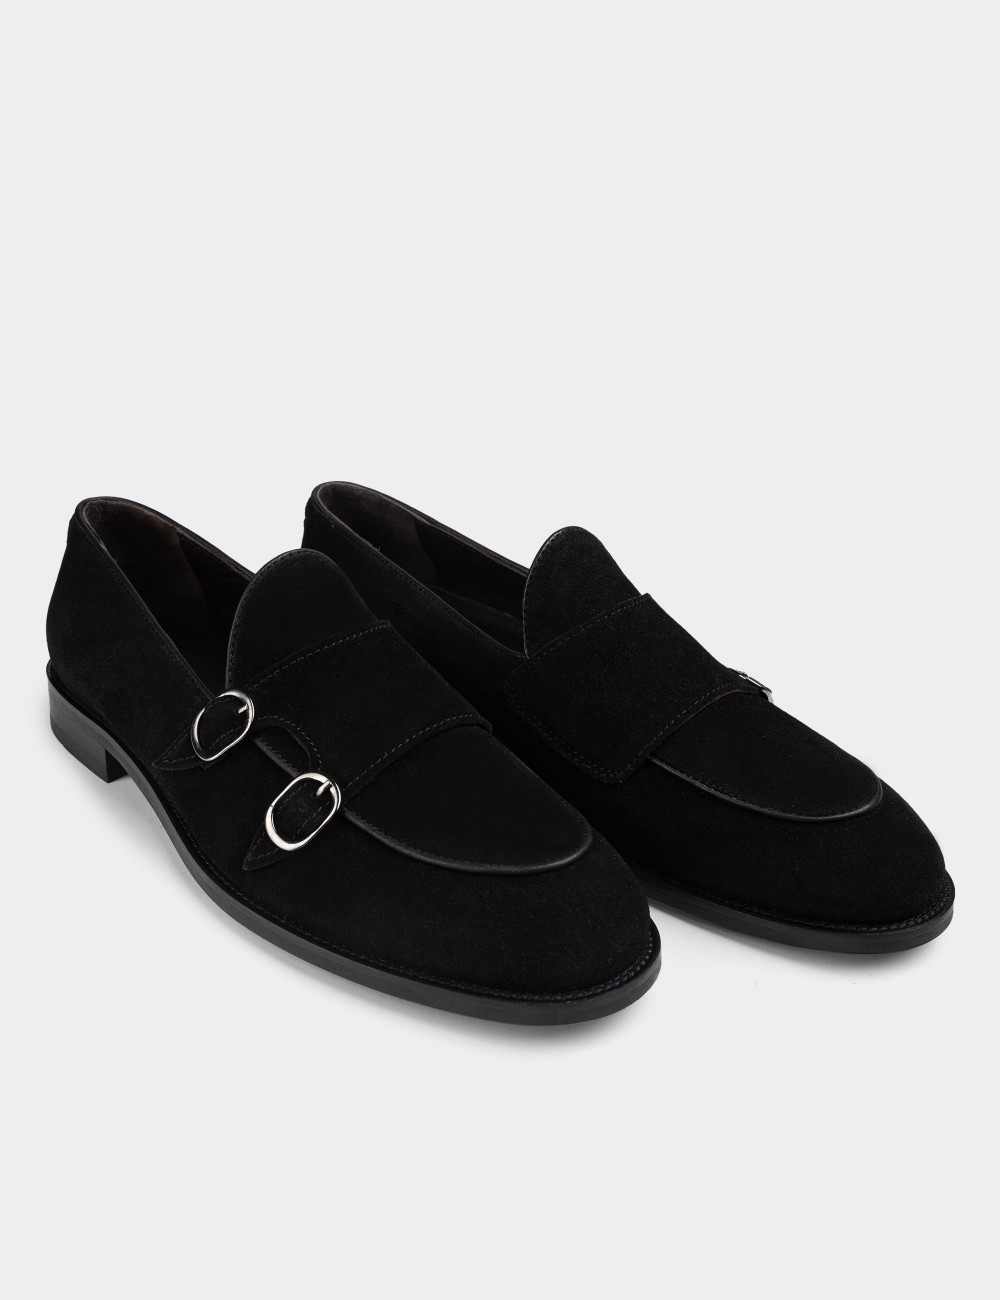 Black Suede Leather Double Monk-Strap Loafers - 01844MSYHN02